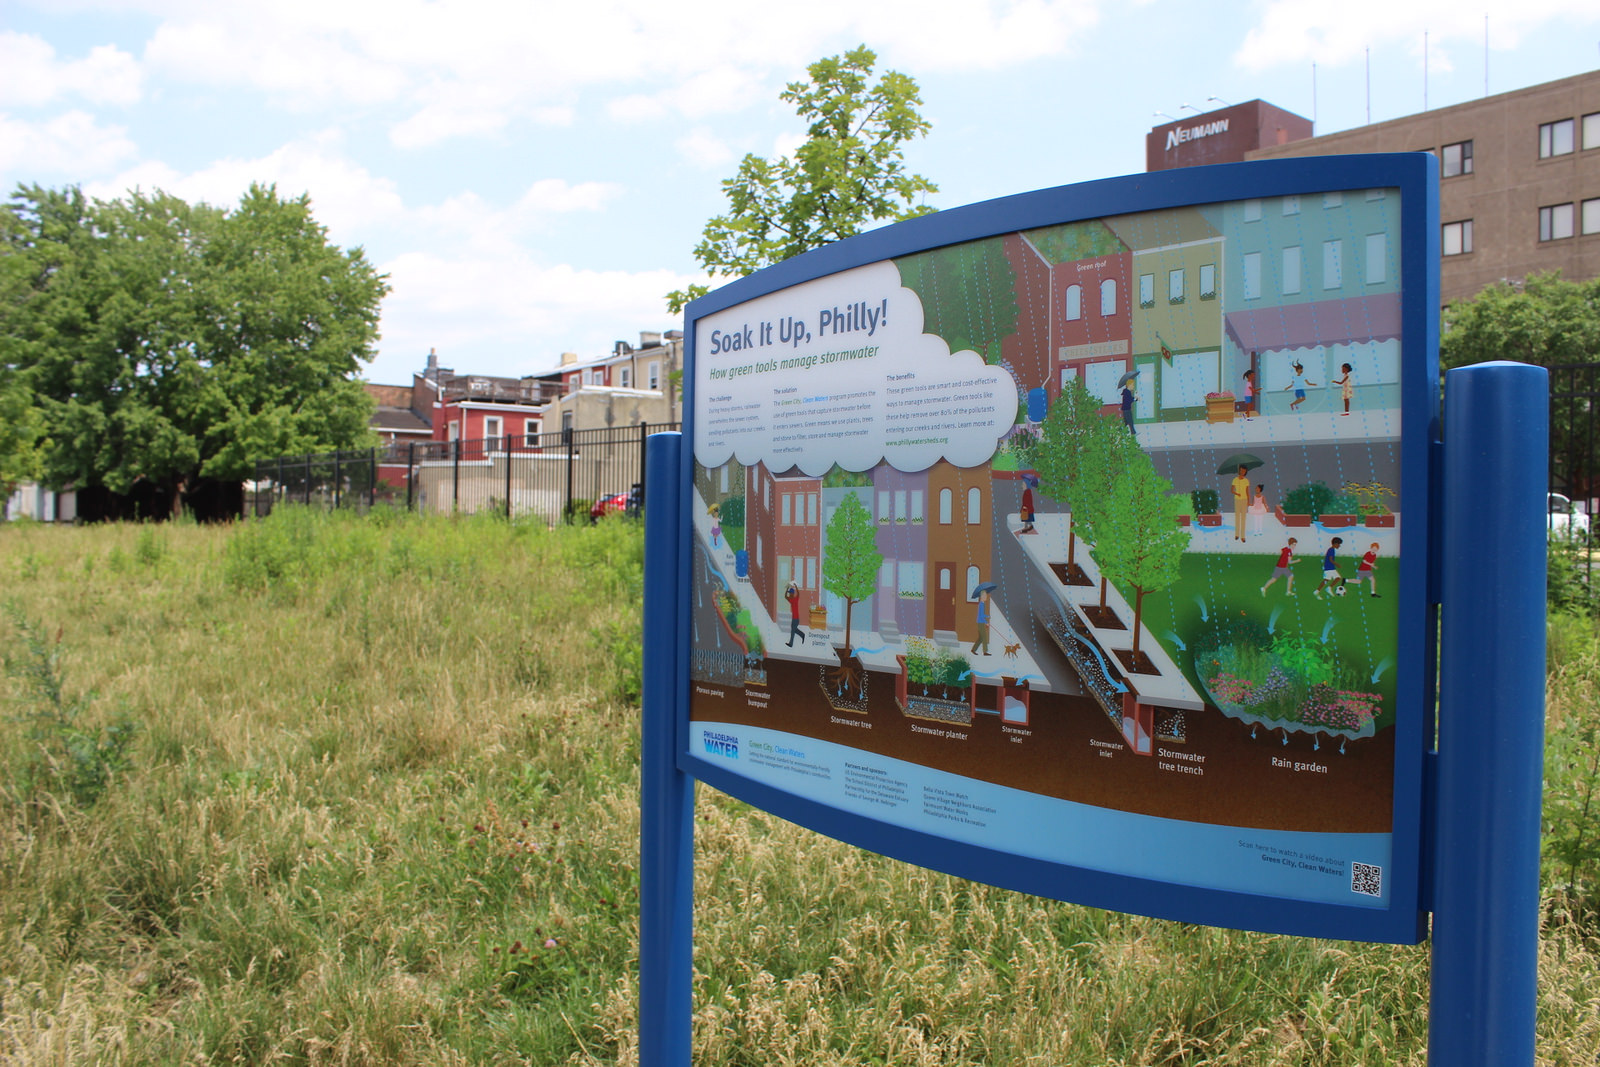 How Do You Make Green Infrastructure Fun? Soak It Up, Philly! Tries Its Hand